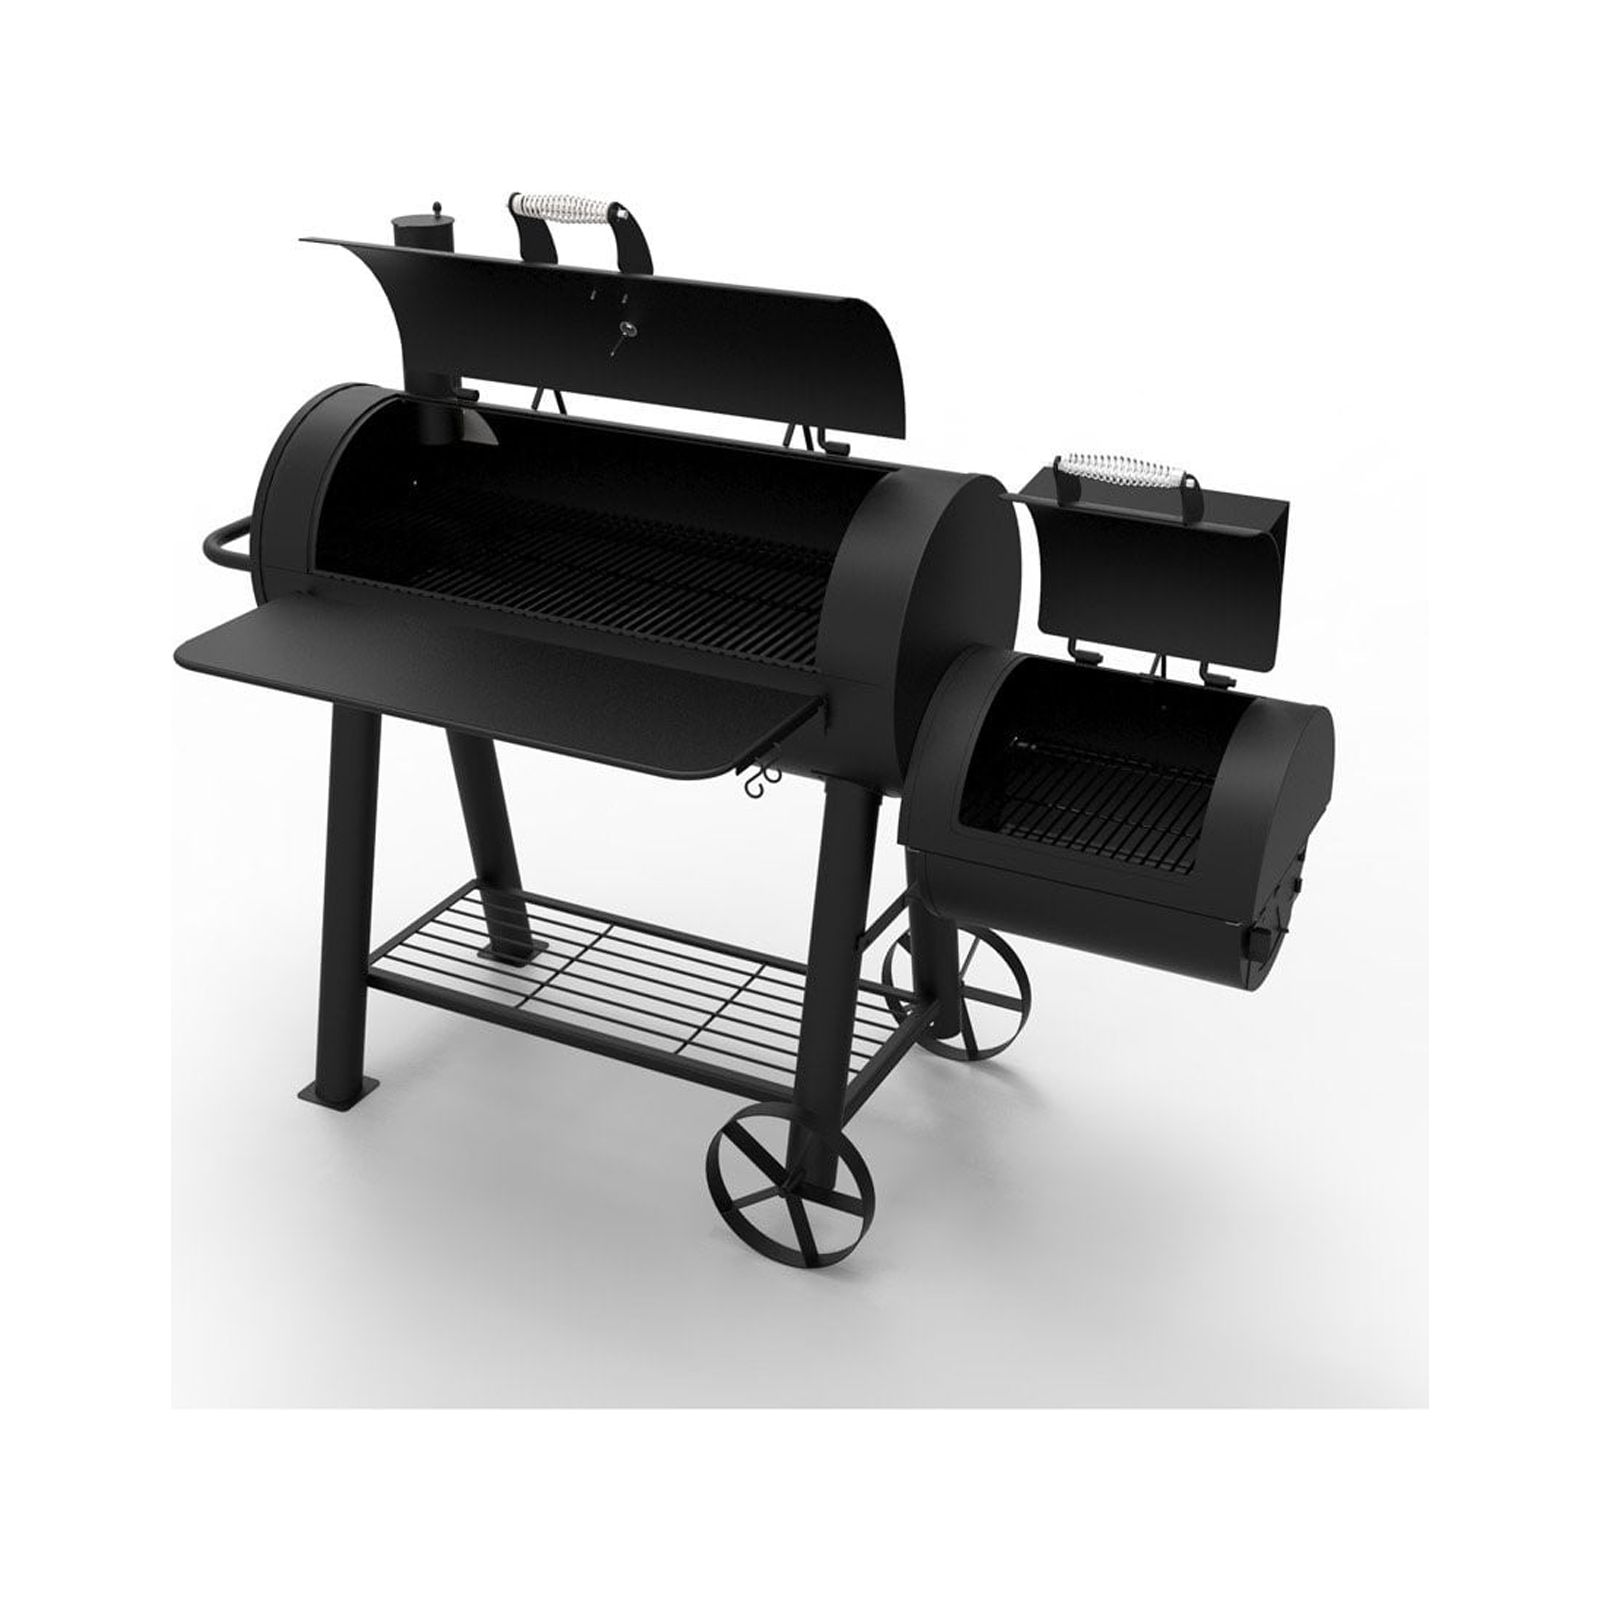 Char-Griller Competition Pro 8125 Charcoal Grill - image 2 of 4